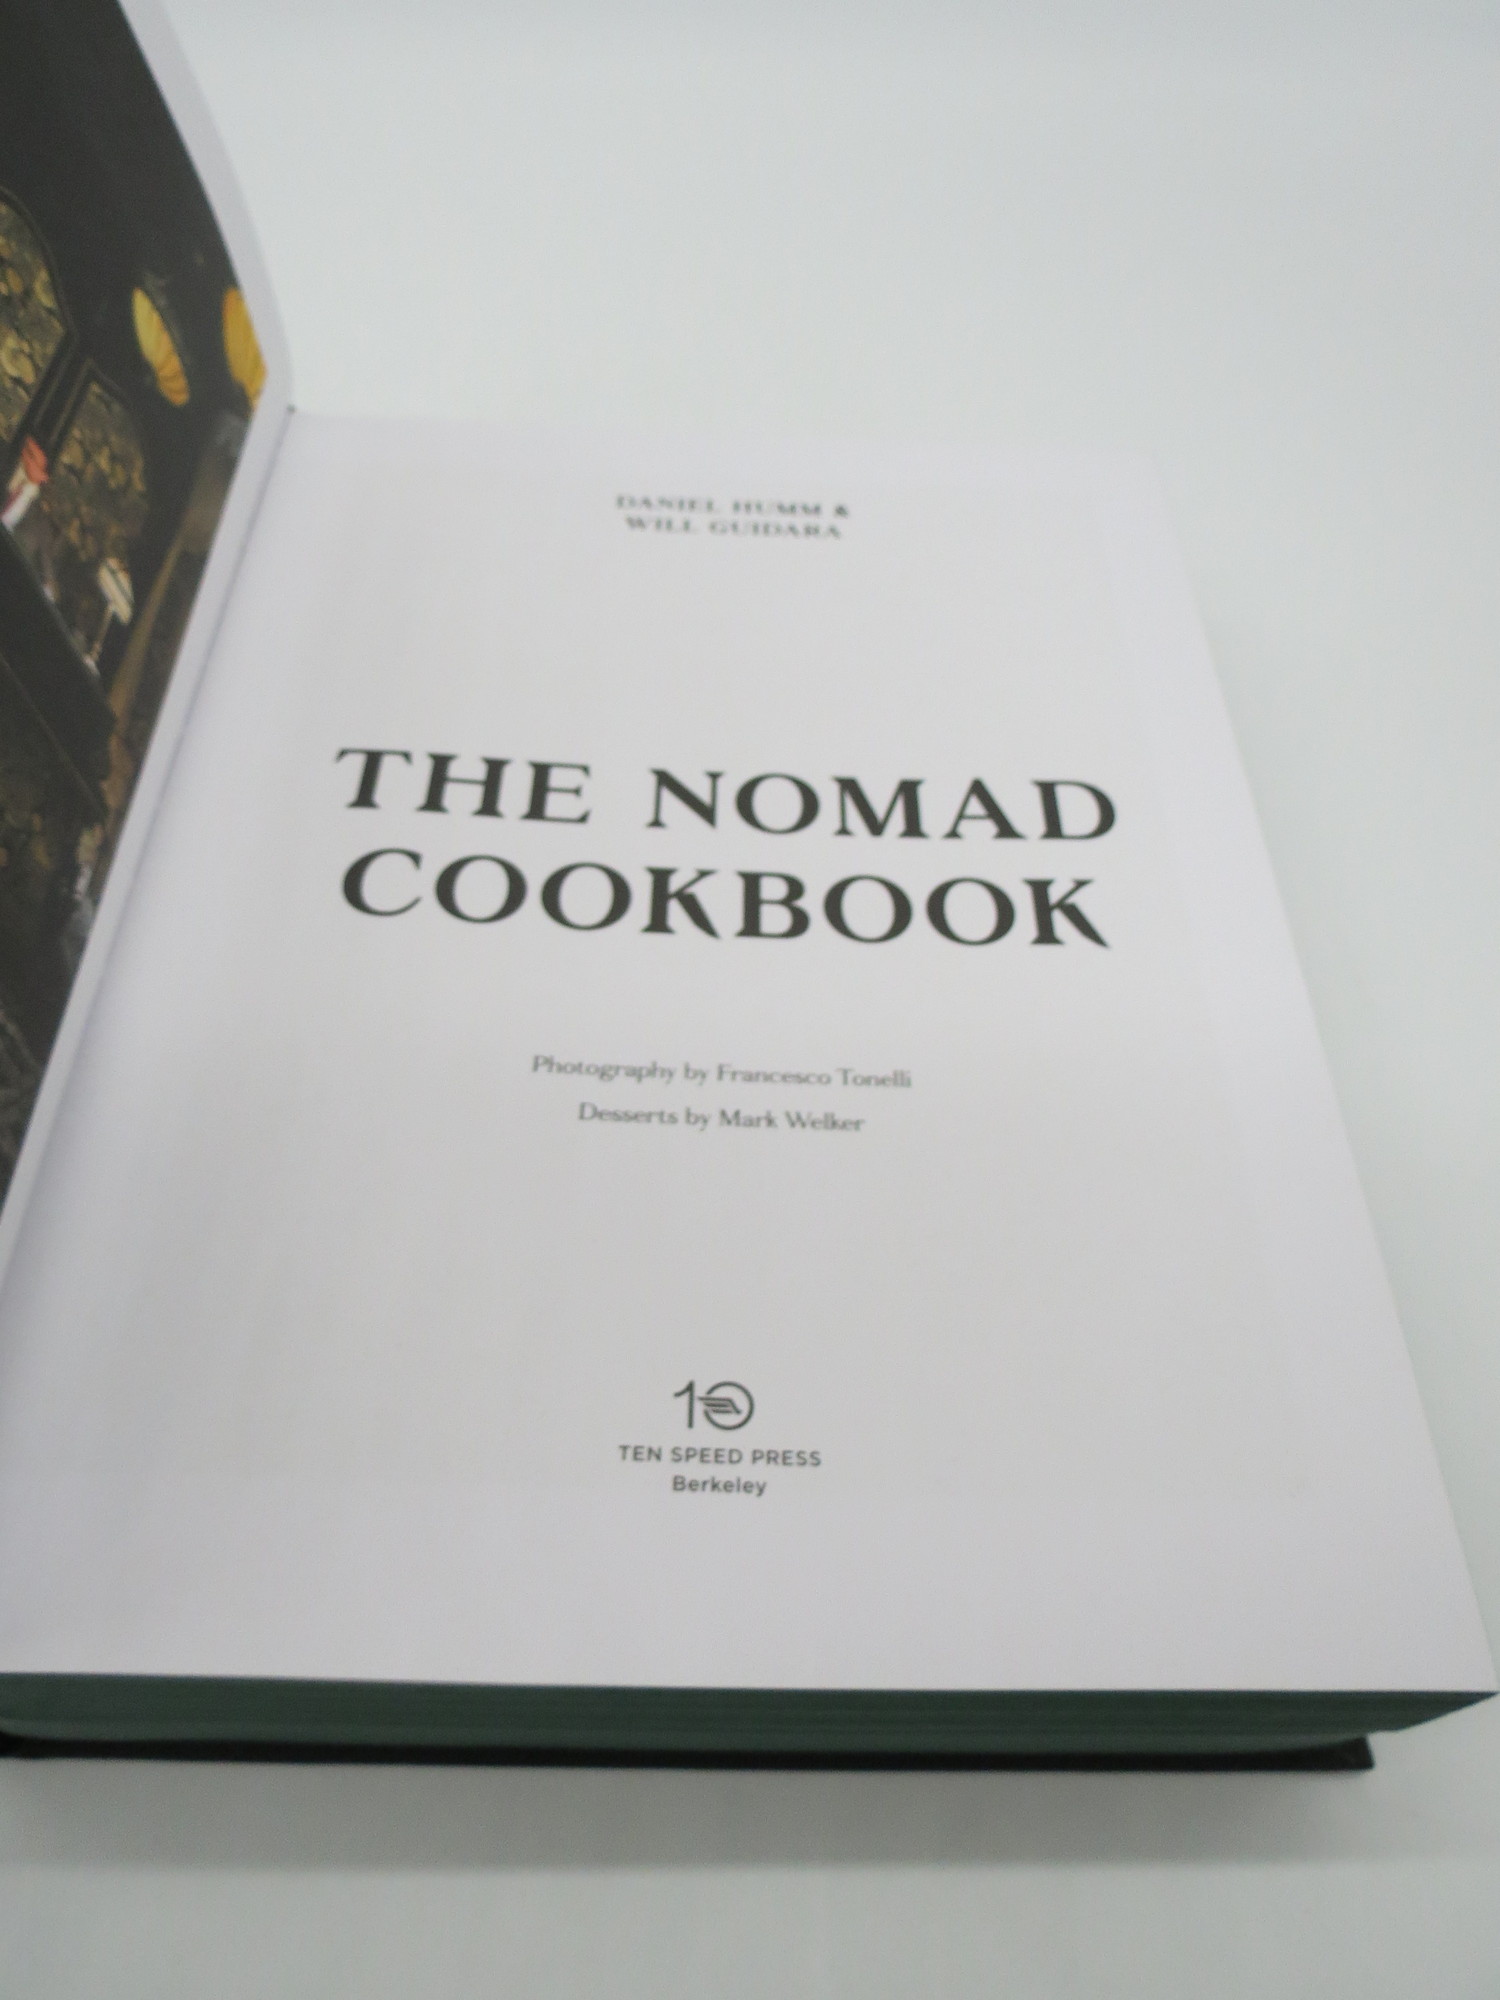 THE NOMAD COOKBOOK & THE NOMAD COCKTAIL BOOK